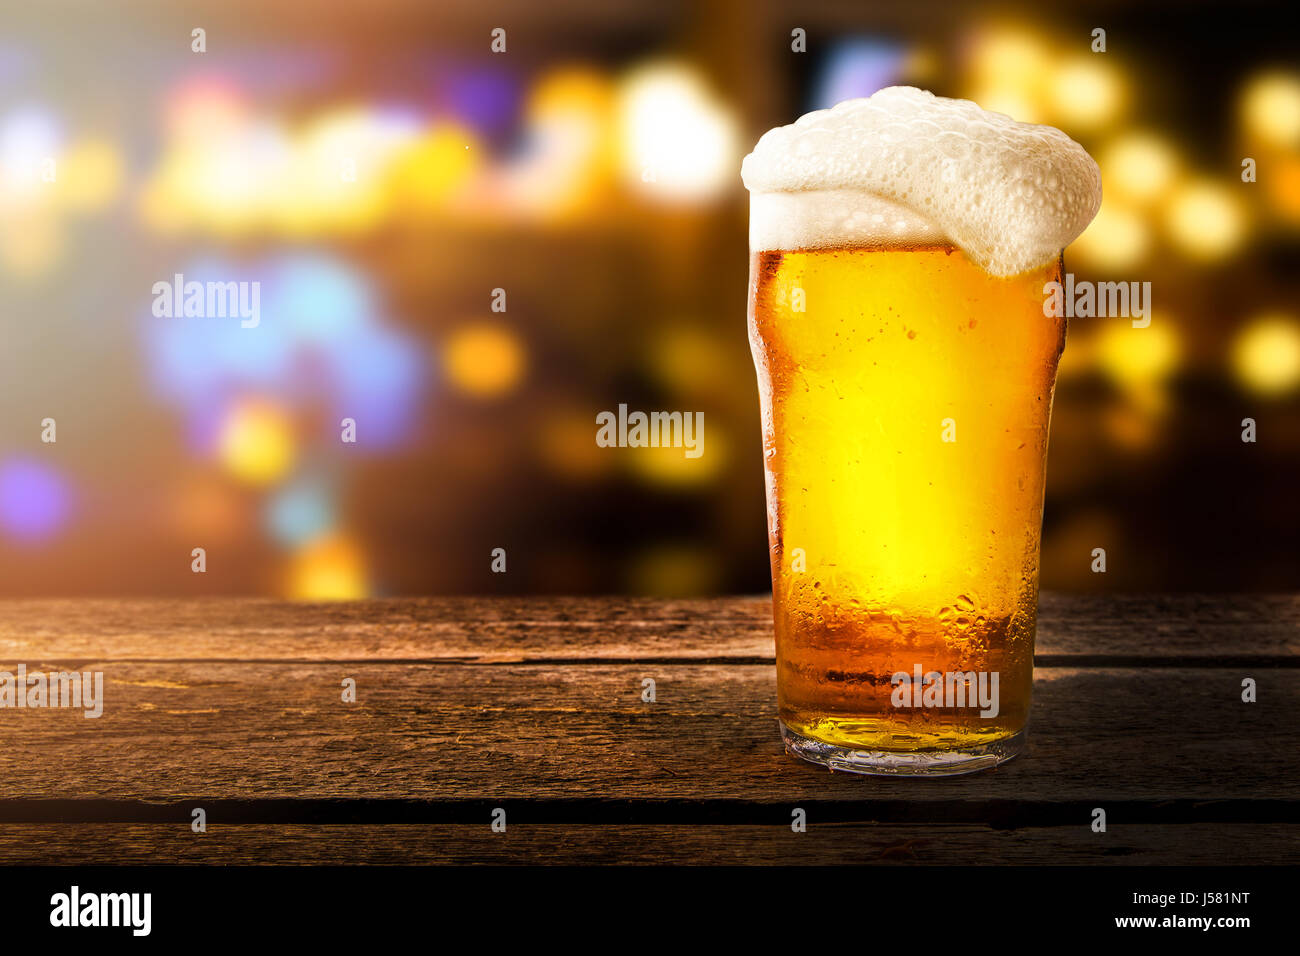 glass of beer on a table in a bar on blurred bokeh background Stock Photo